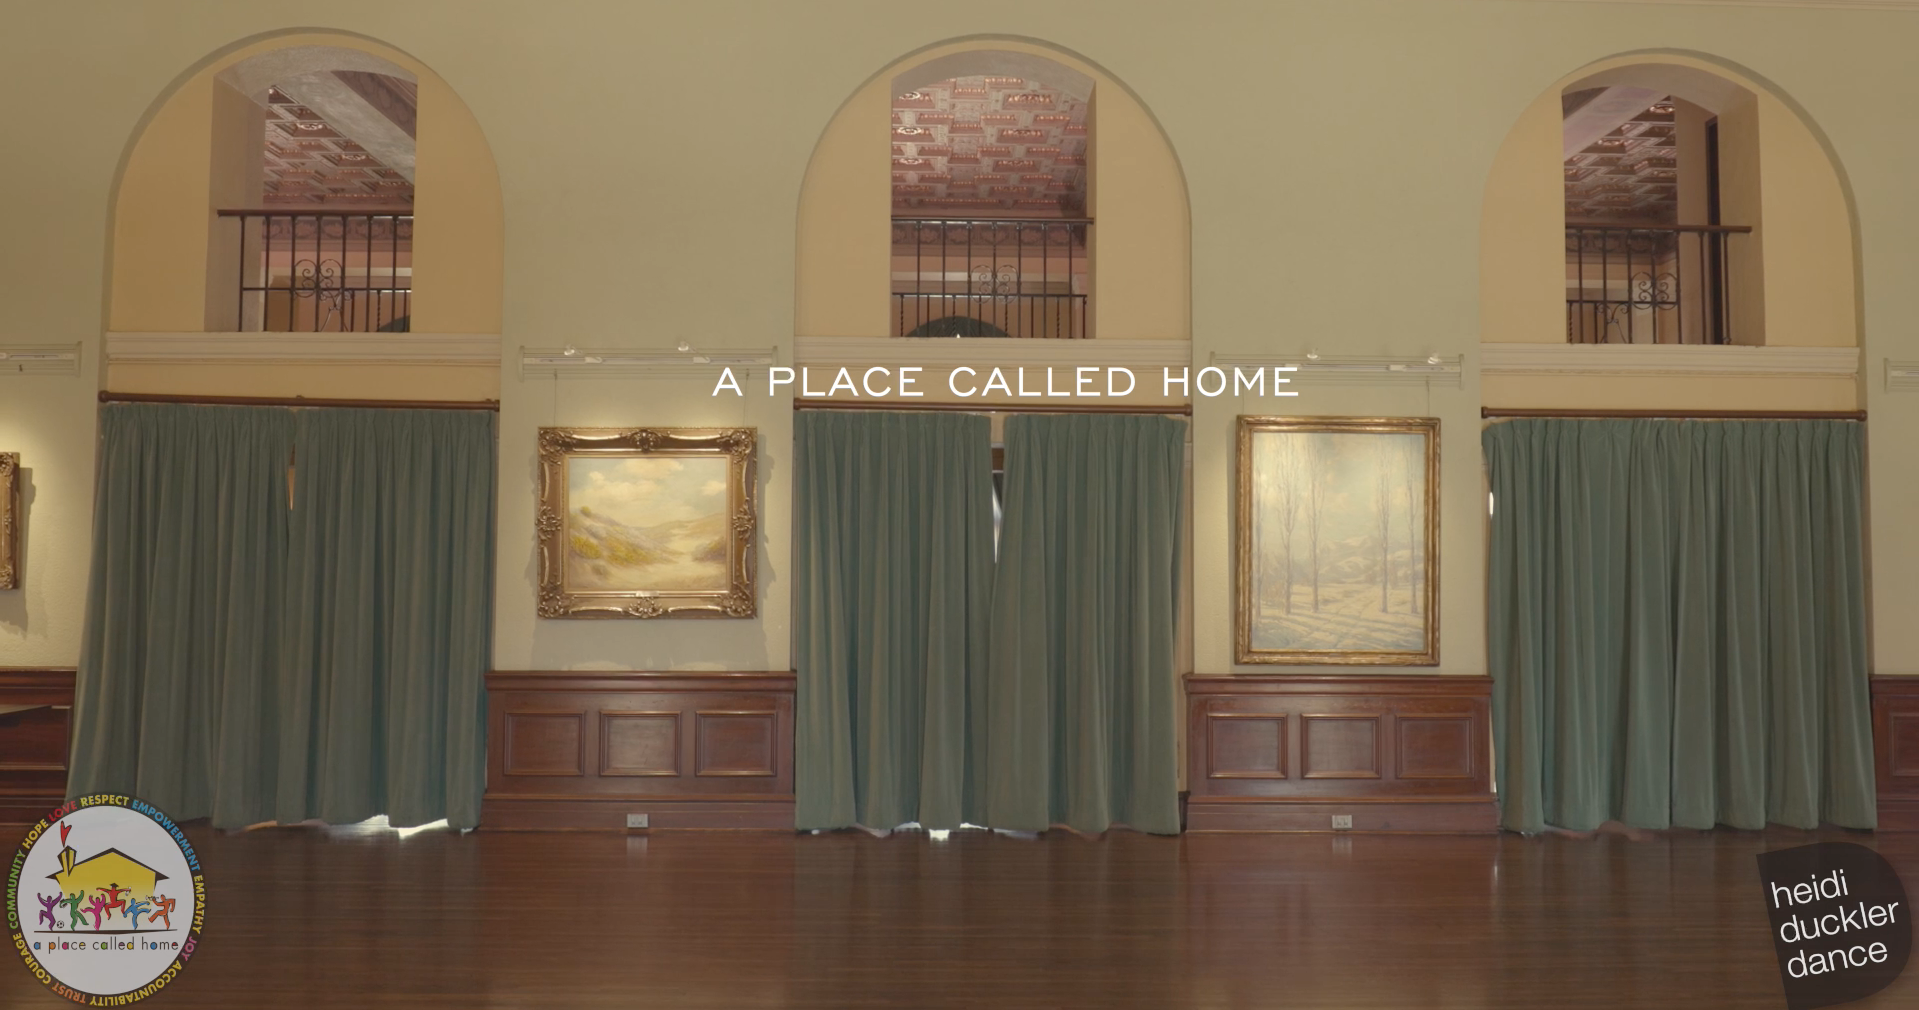 Empty ballroom with curtains over the doorways. Overlaying text reads "A Place Called Home." Logos for Heidi Duckler Dance and A Place Called Home are place in the bottom corners of the image